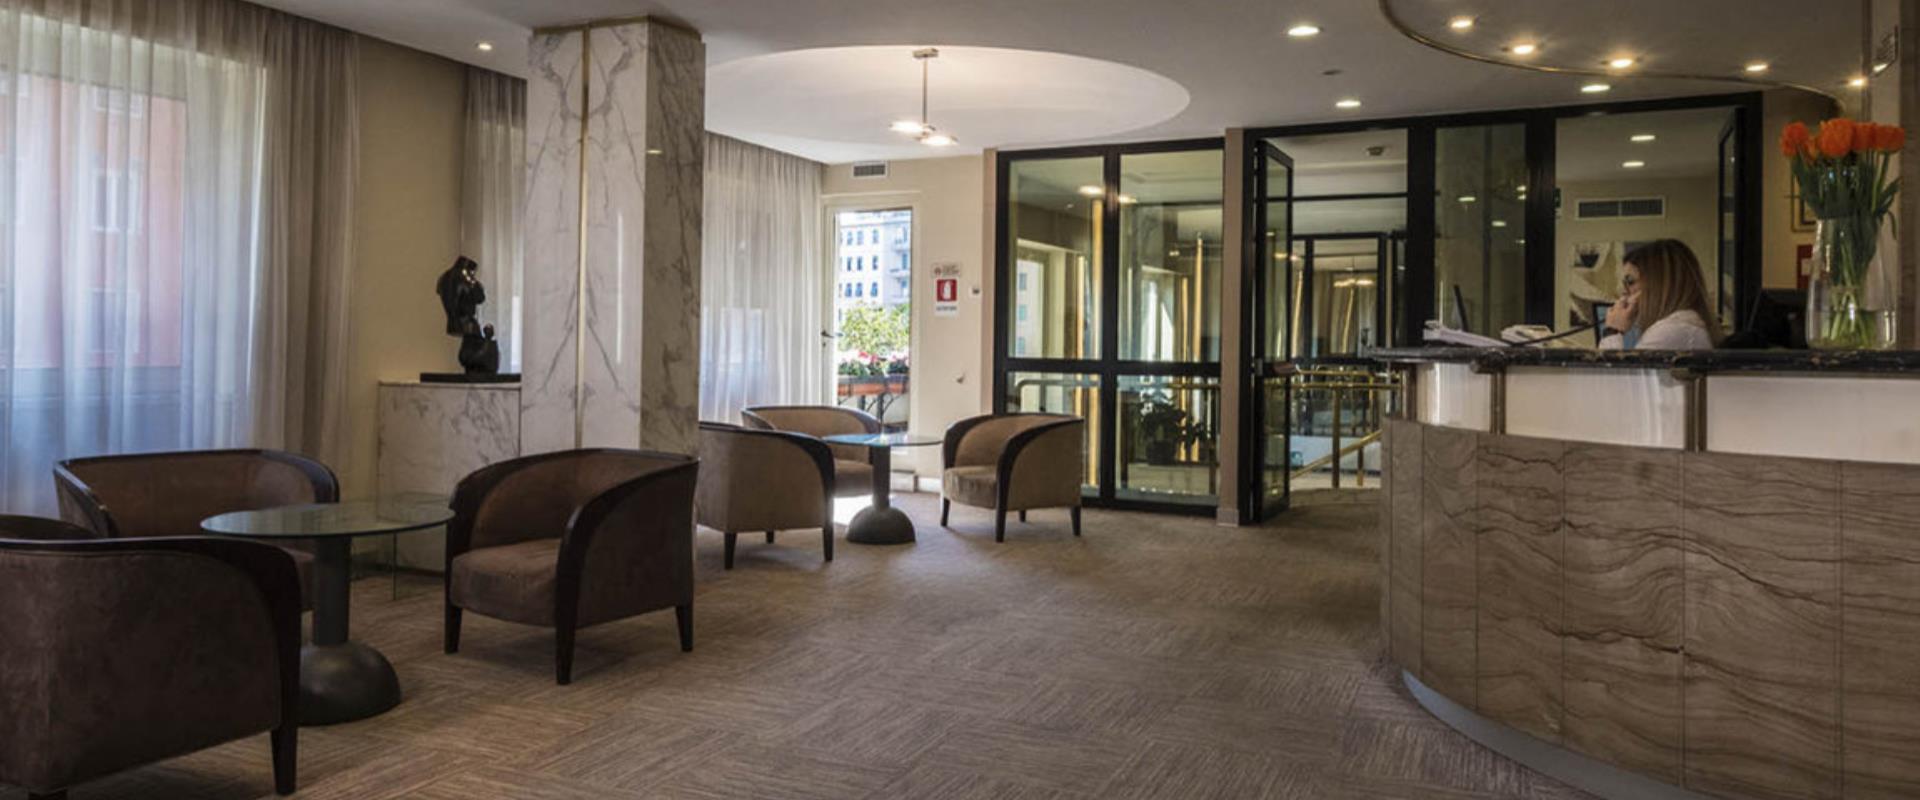 Hall Best Western Hotel Piccadilly, albergo 3 stelle in zona San Giovanni a Roma, recentemente rinnovata